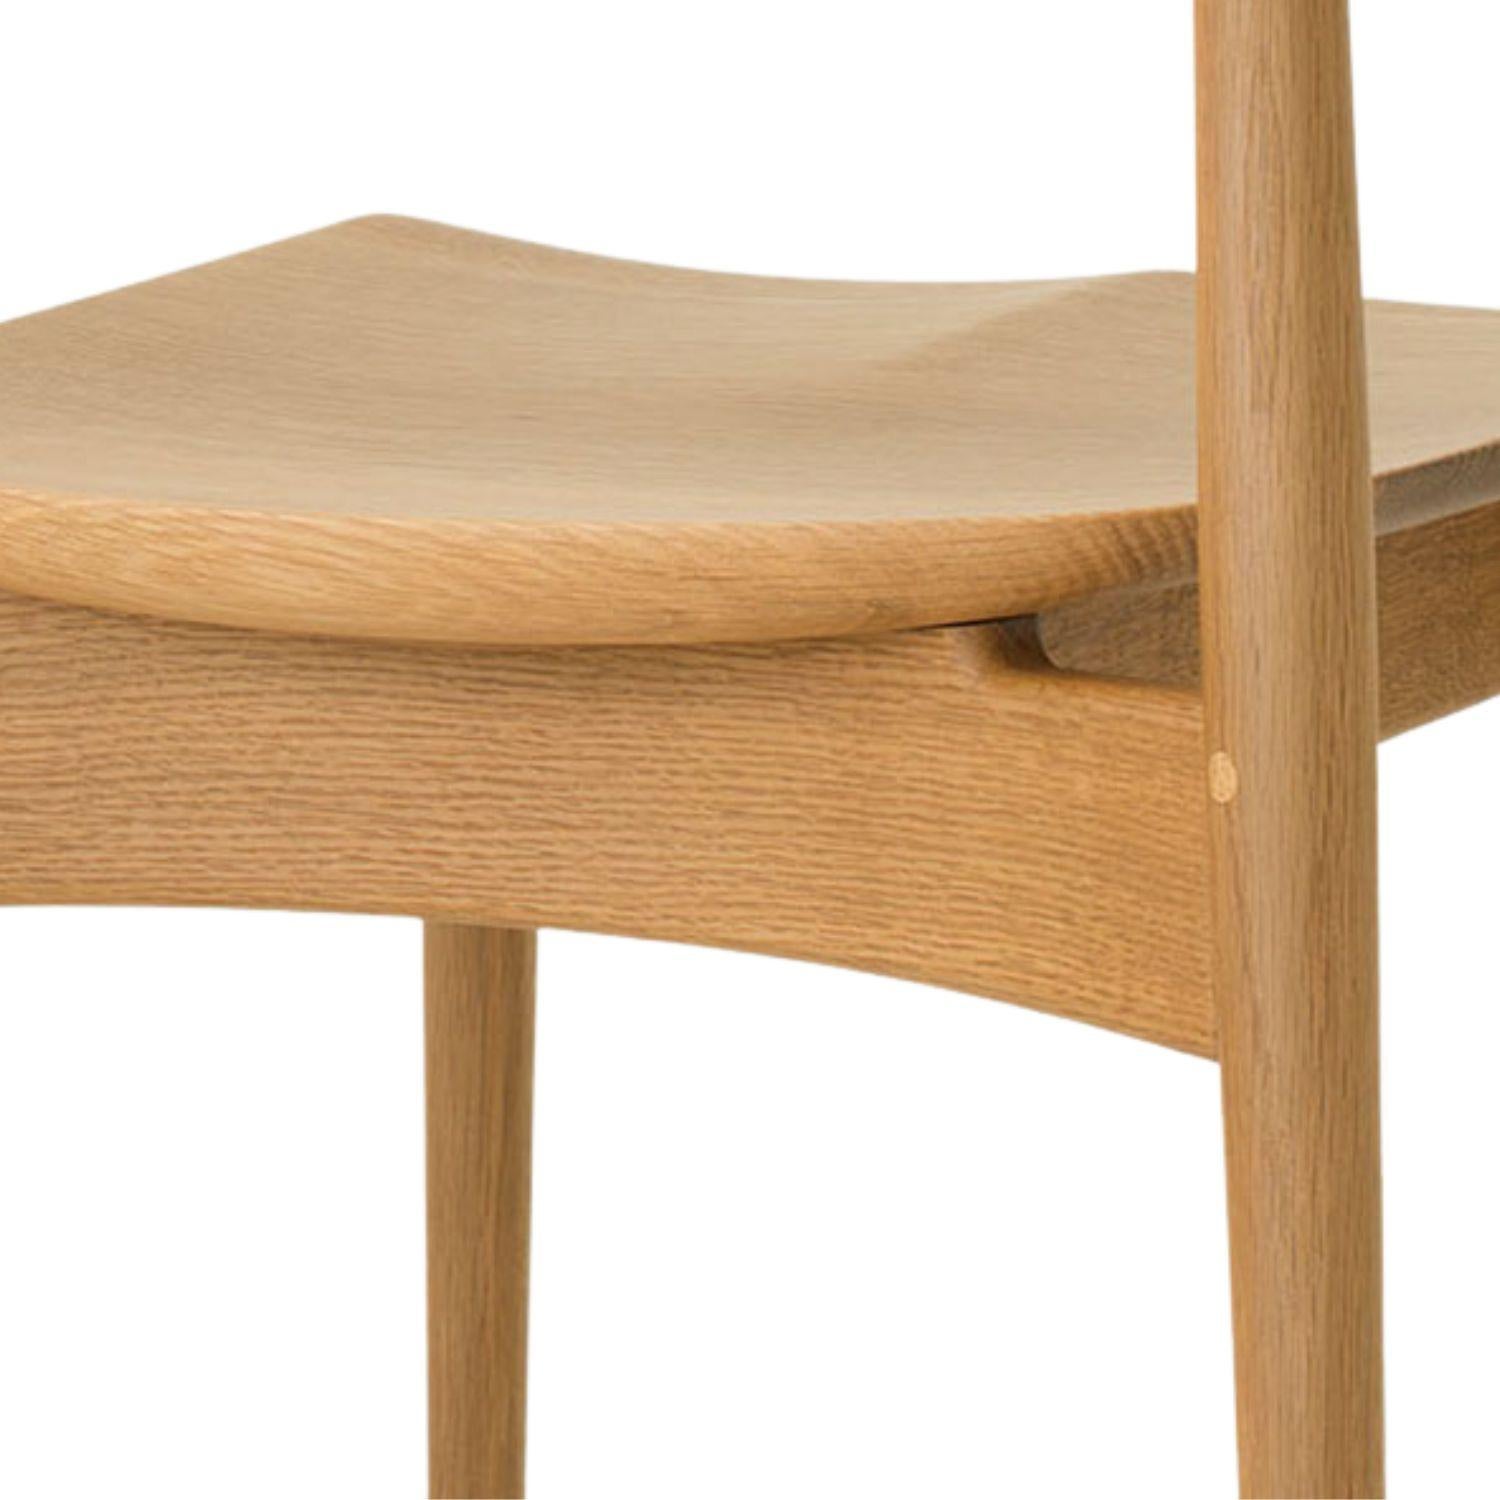 Motomi Kawakami 'Seoto KD201' Dining Chair in Oak and Upholstery for Hida For Sale 5